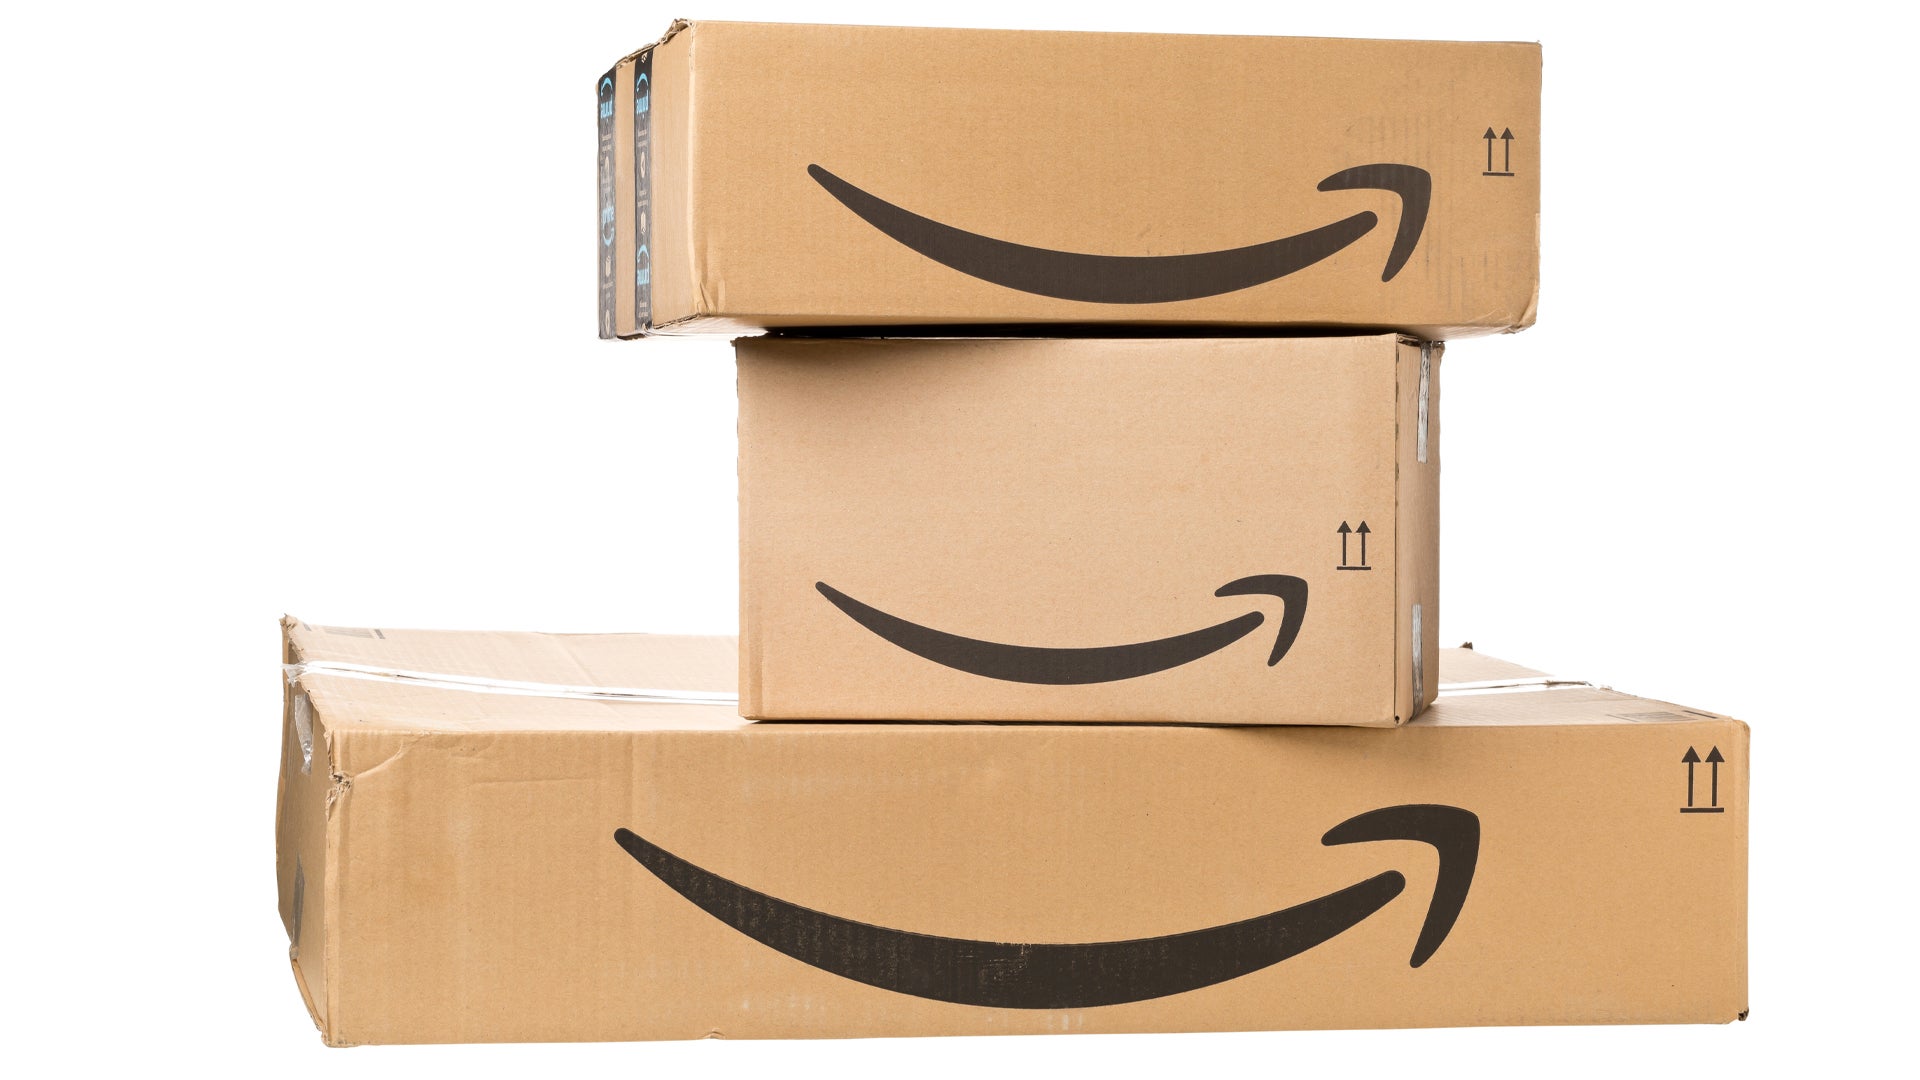 A stacked pile of three Amazon boxes showing the Amazon logo